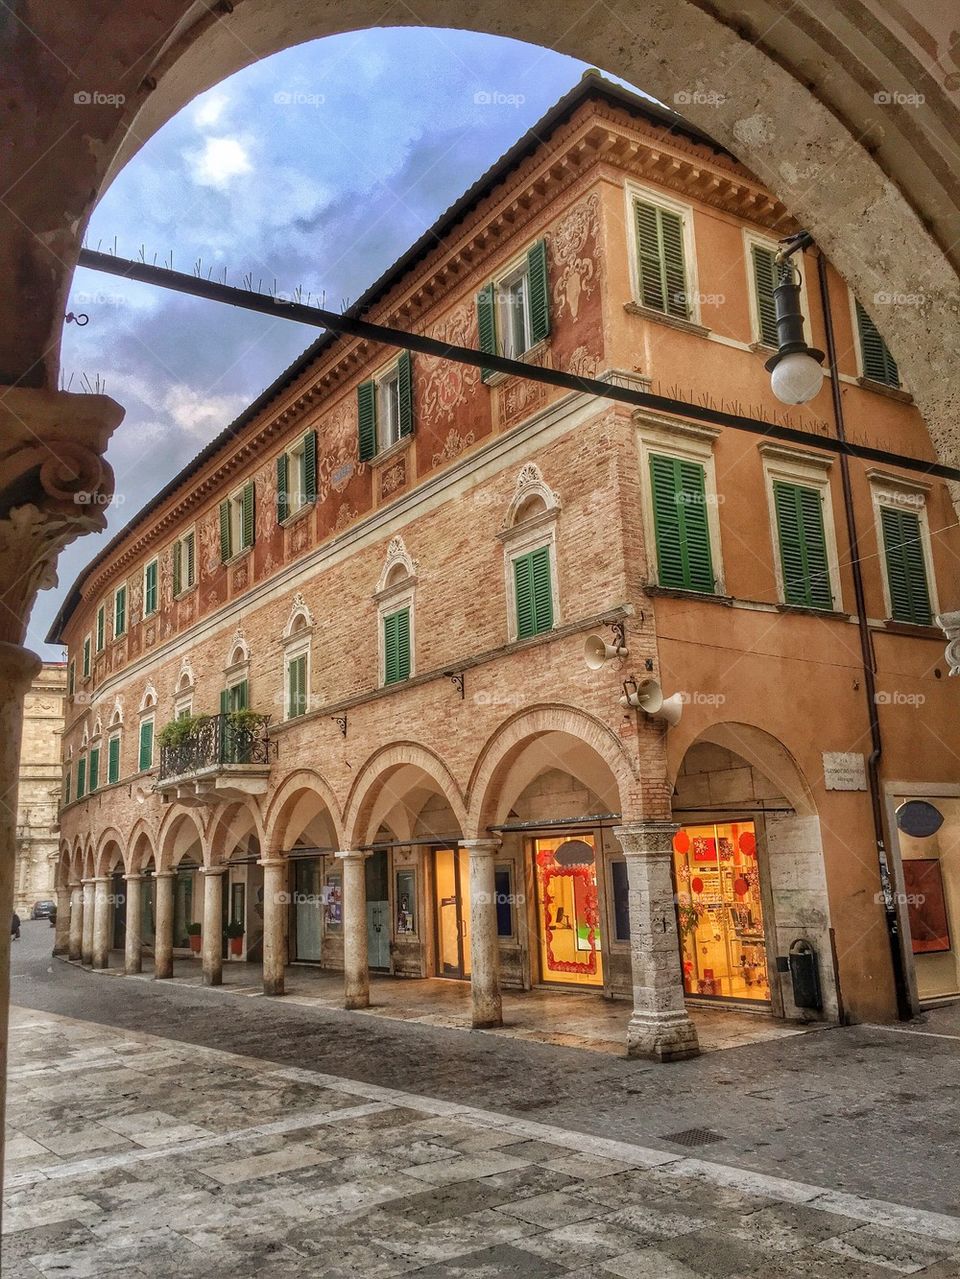 View of building at ascoli piceno, italy